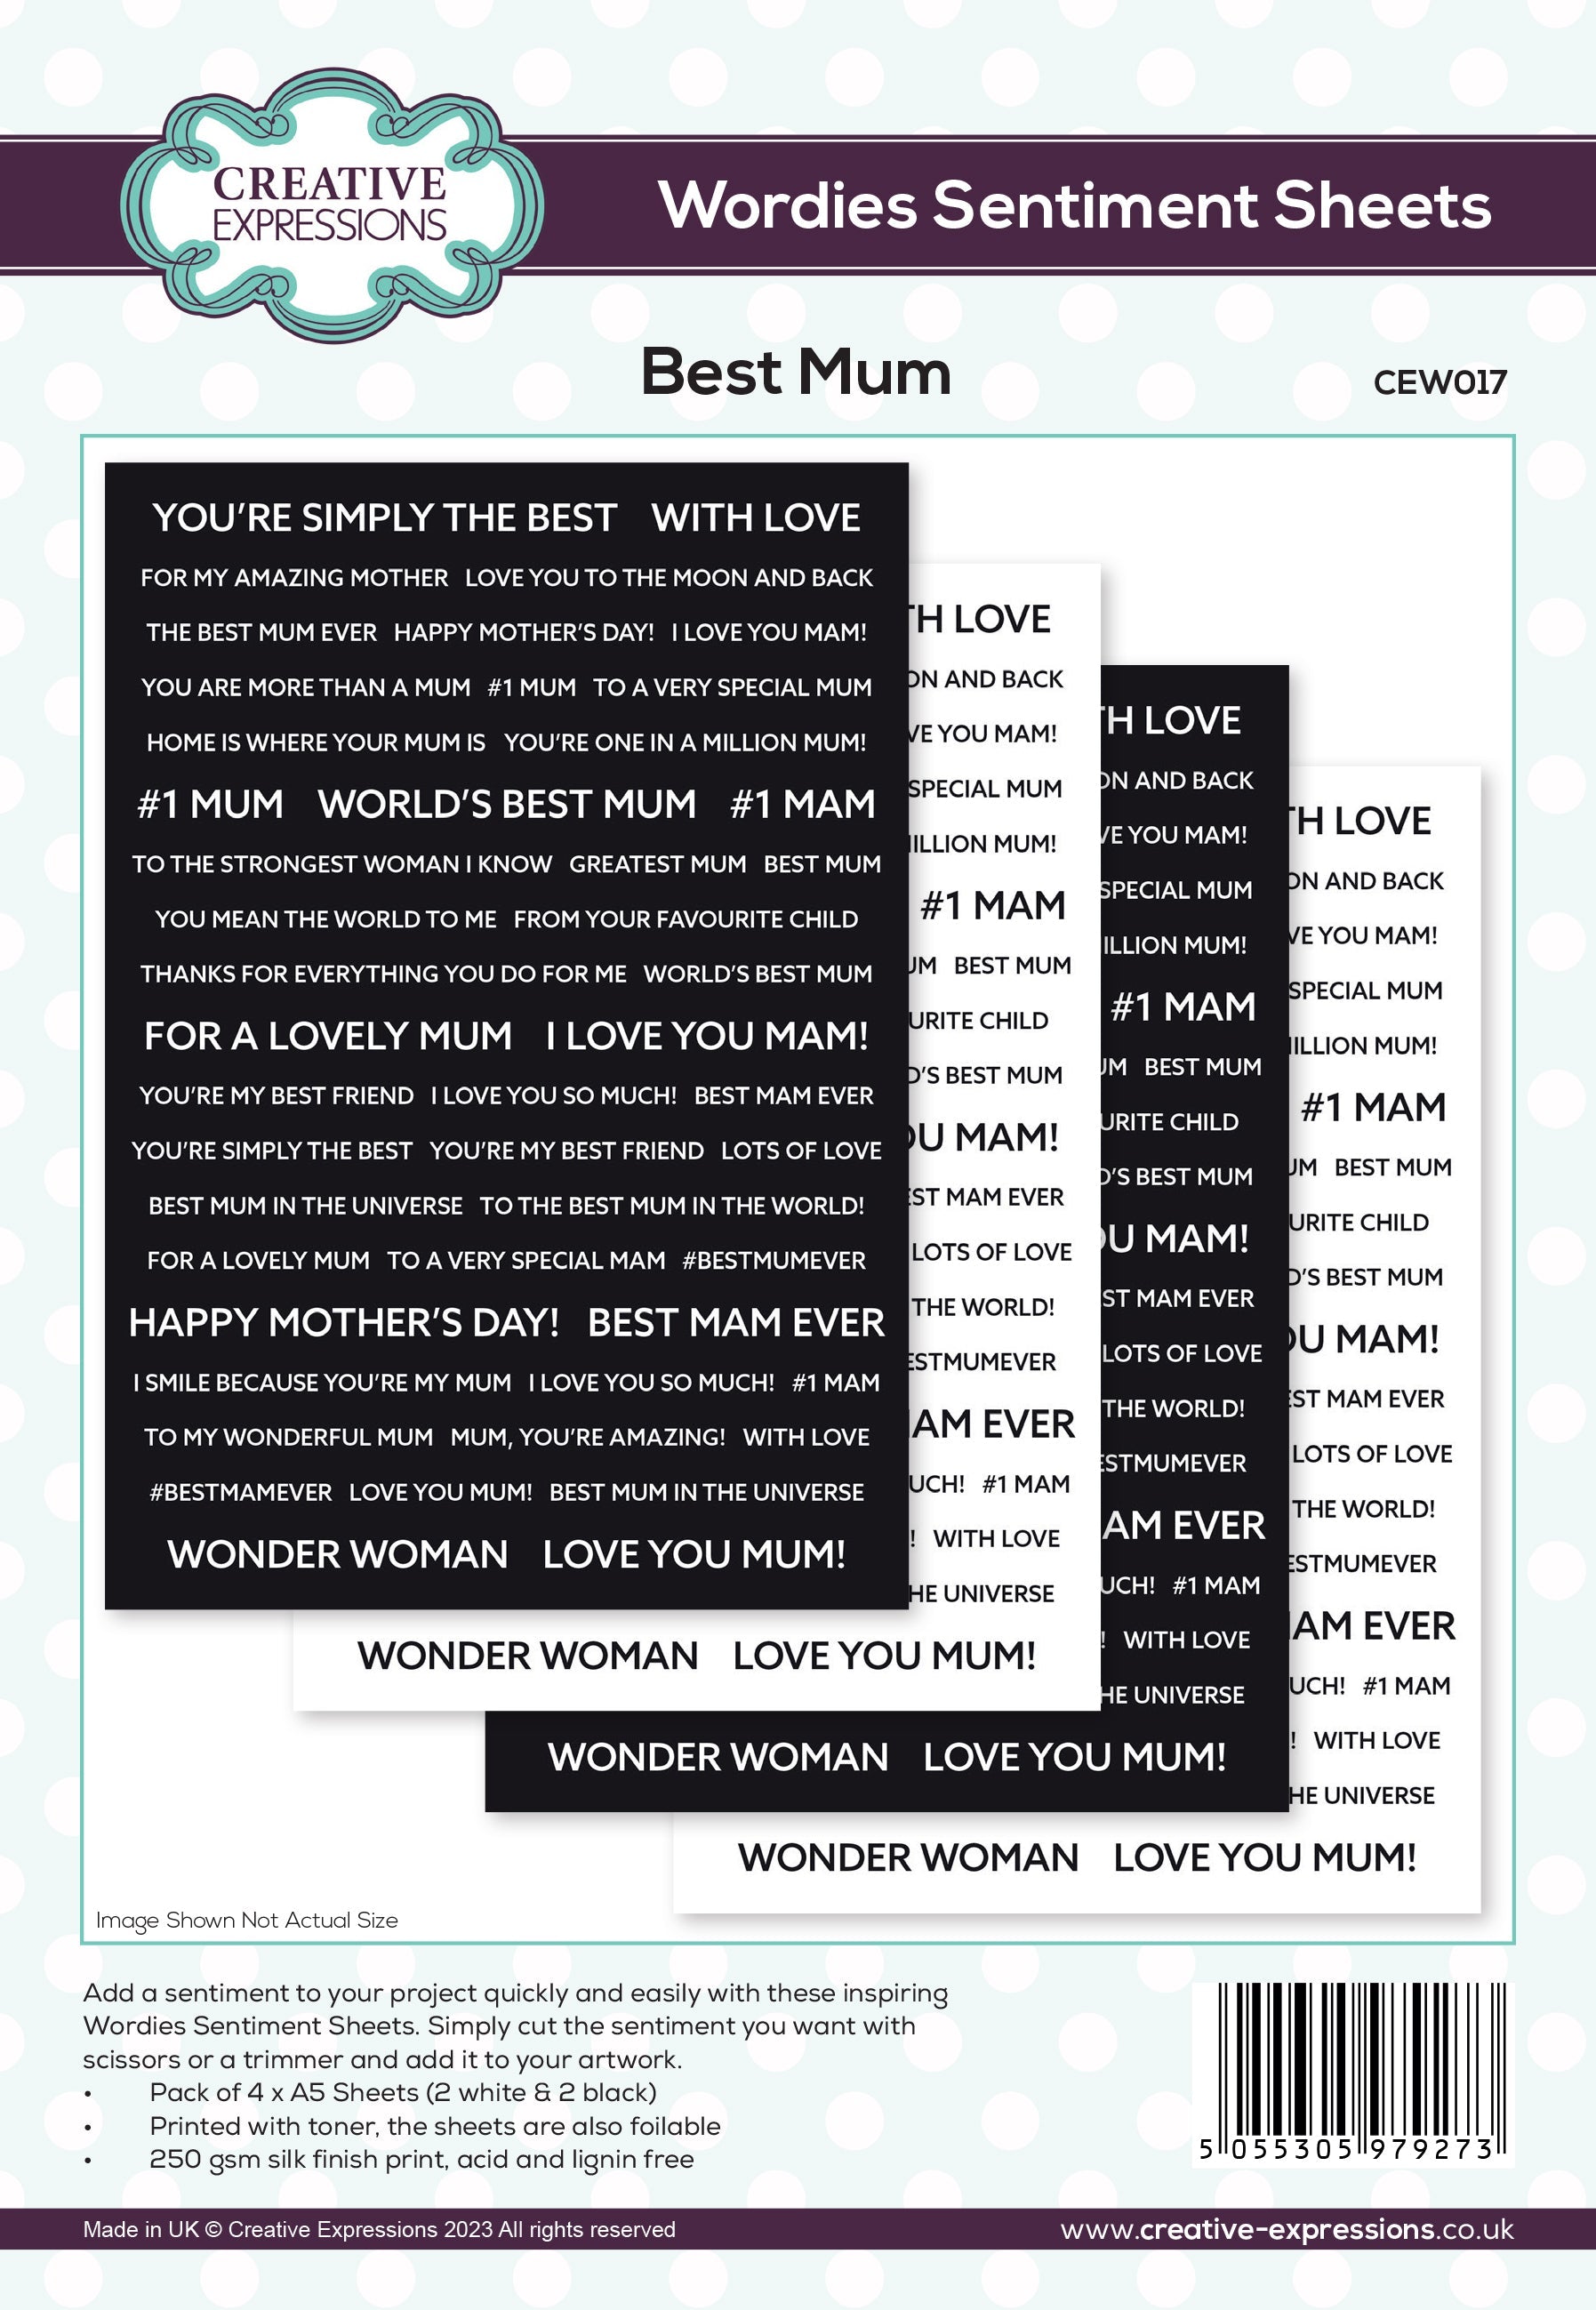 Creative Expressions Wordies Sentiment Sheets - Best Mum Pk 4 6 in x 8 in